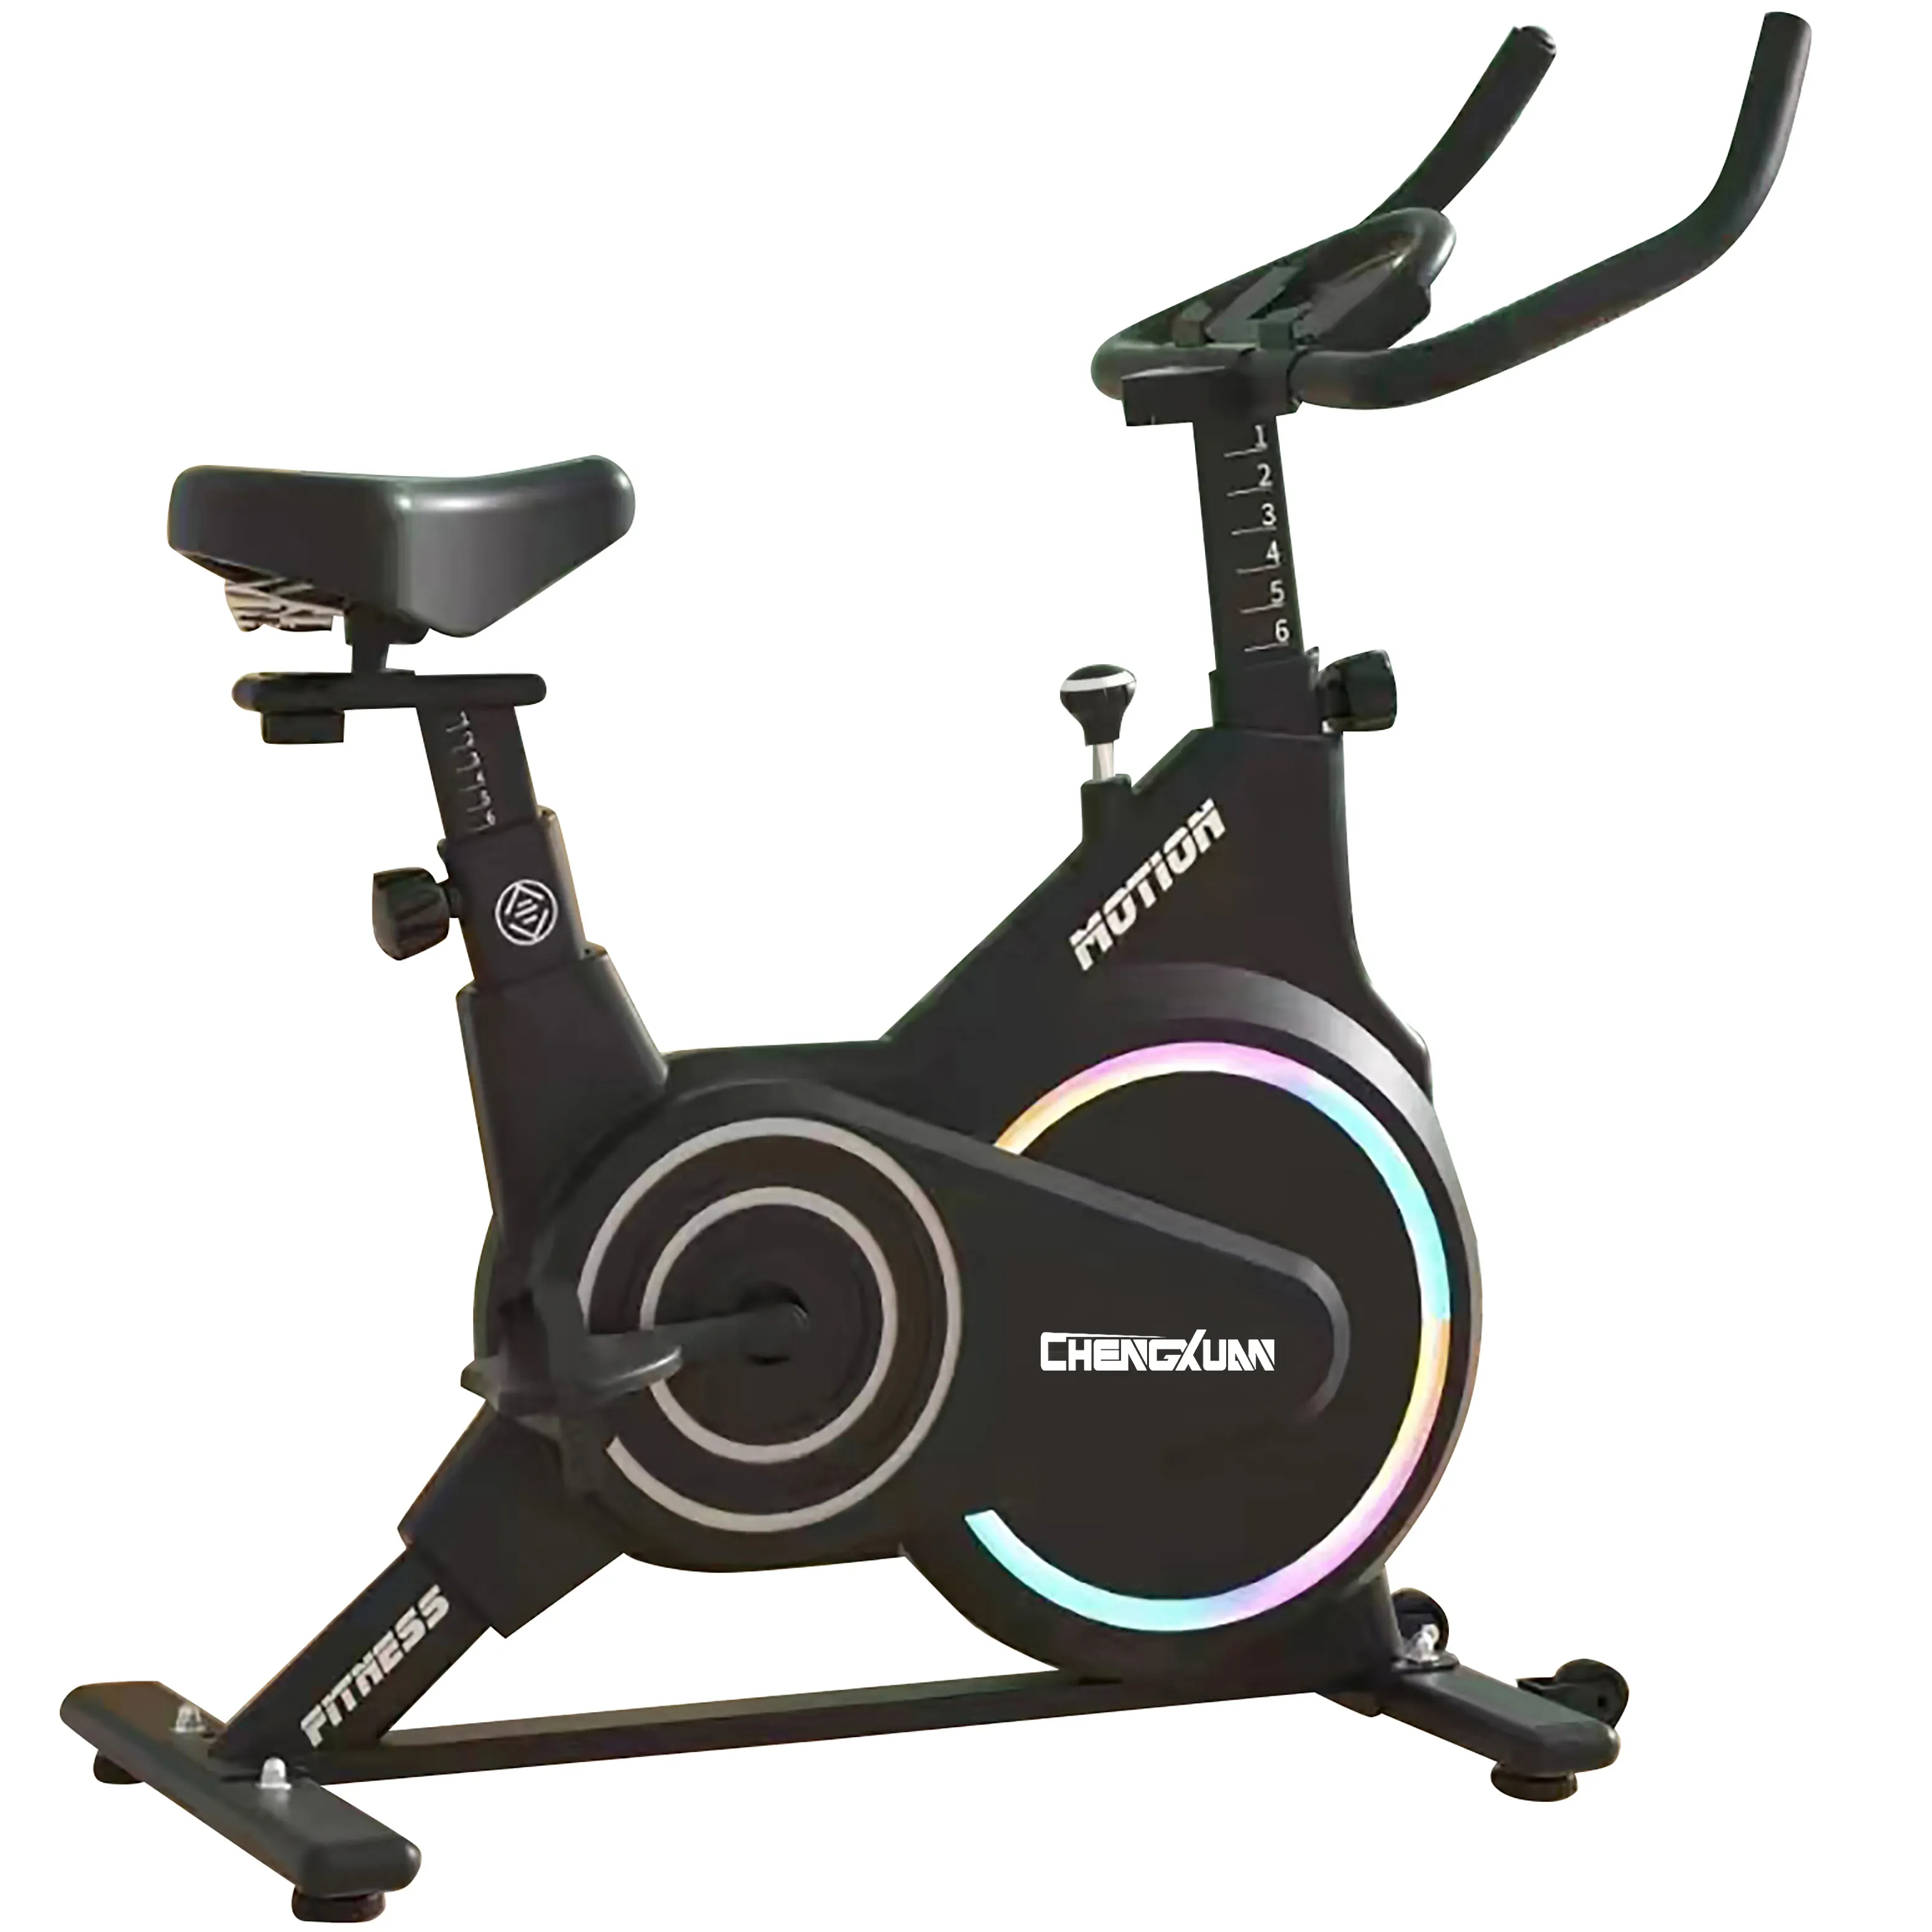 Home commercial magnetic spinning bike exercise bike machine